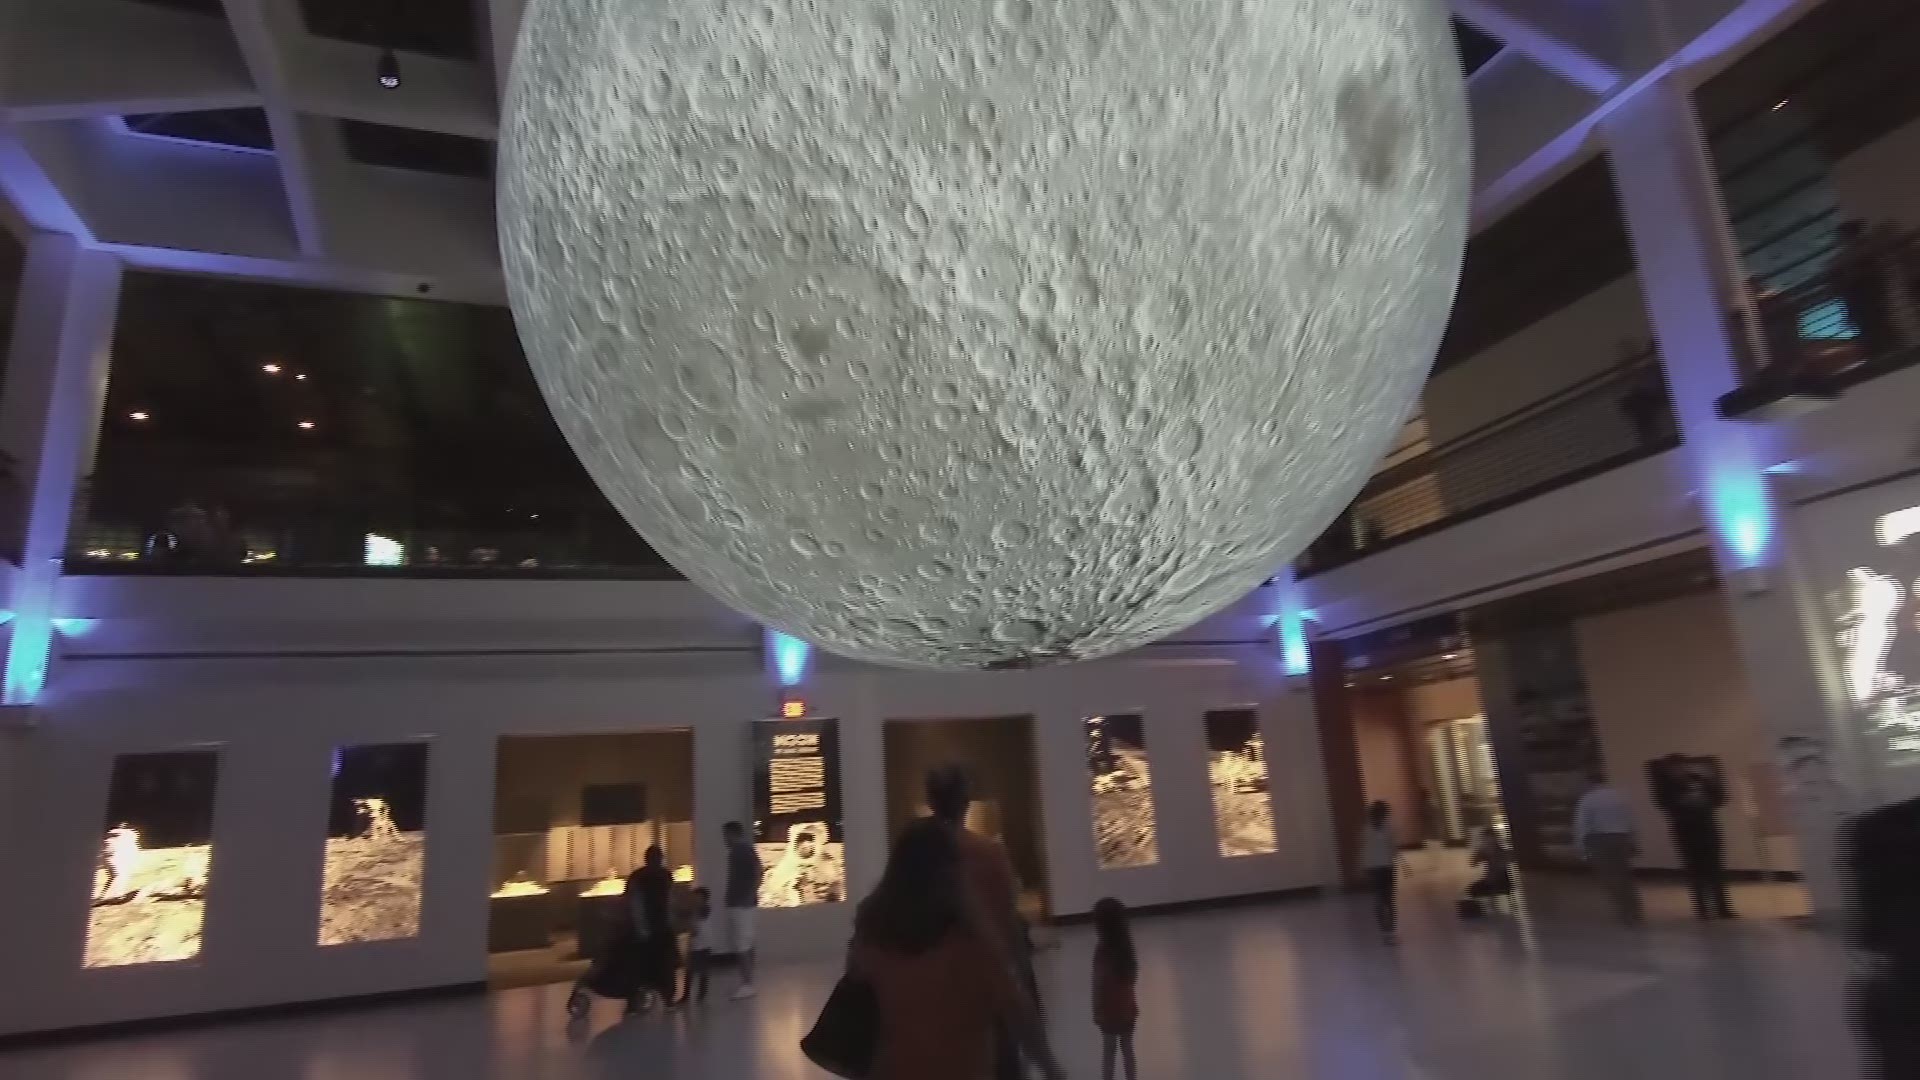 The sculpture by Luke Jerram is internally lit and features NASA imagery of the moon's surface.